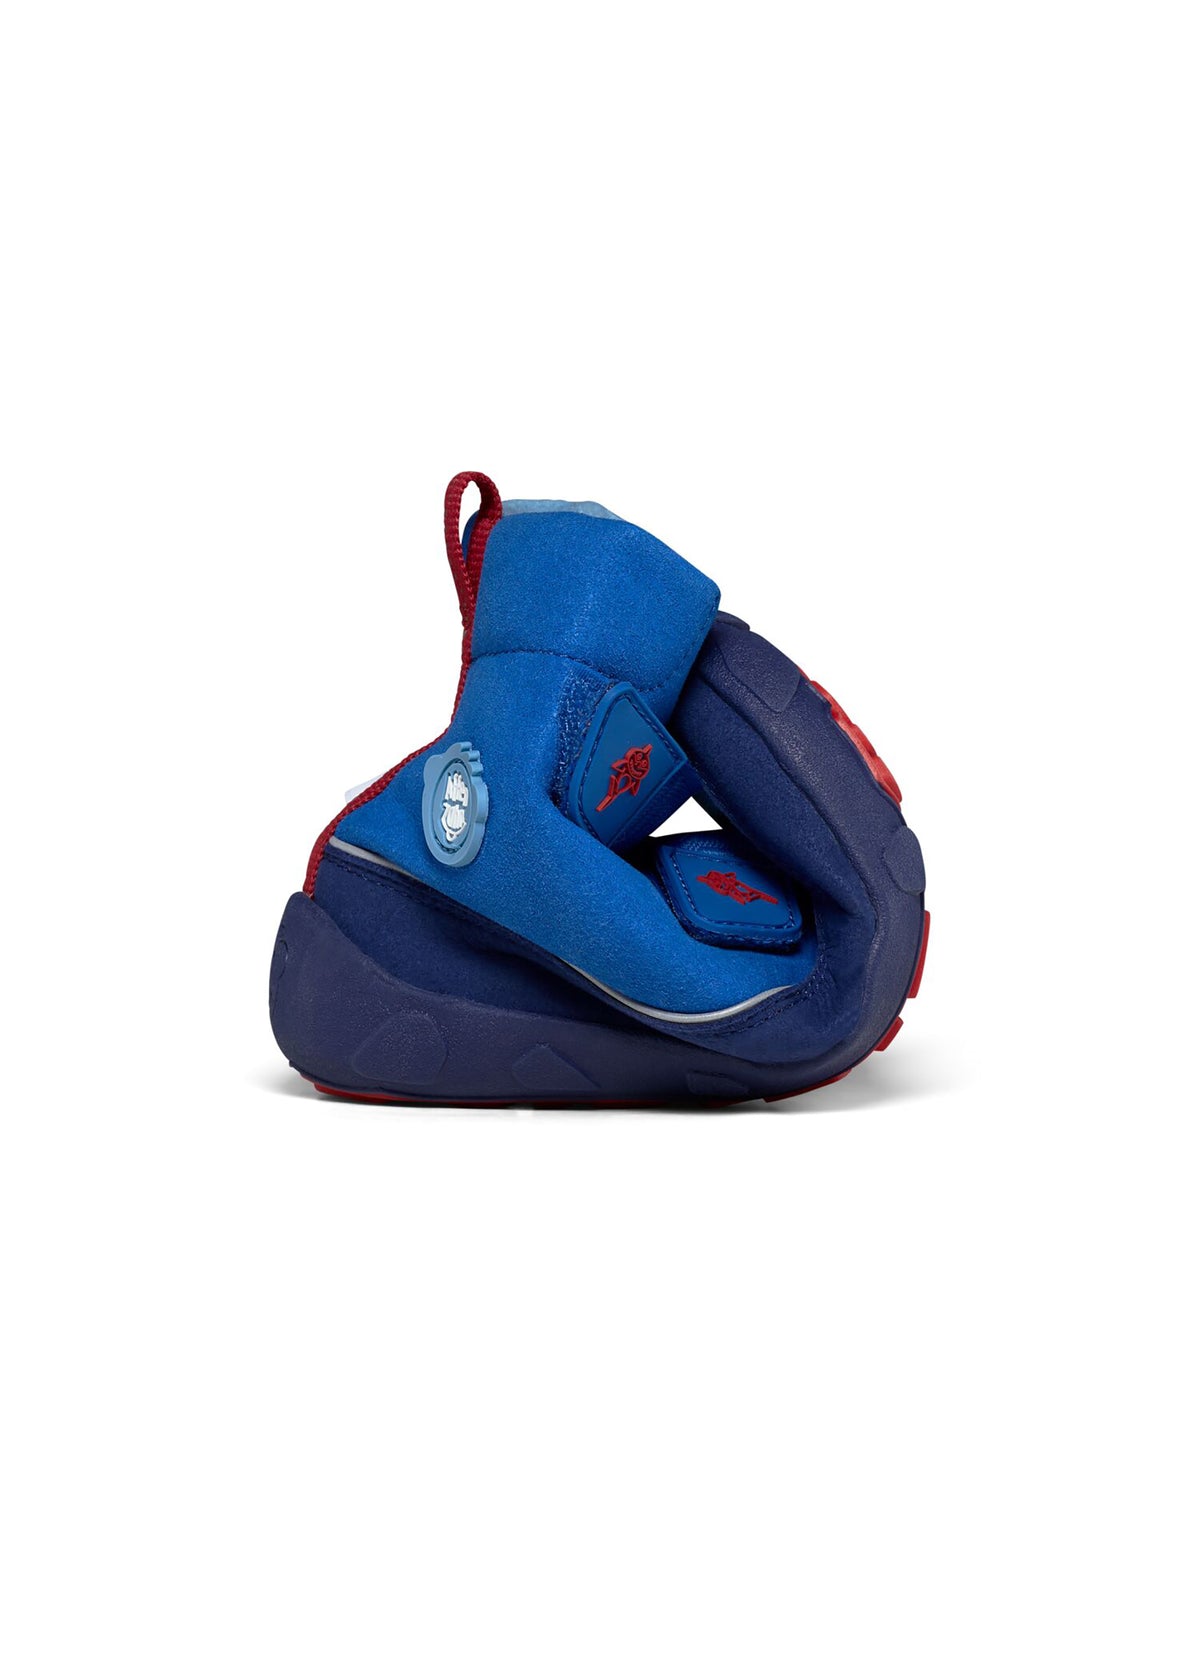 Children's barefoot shoes - Chamude Comfy Shark, winter shoes with TEX membrane - blue, red